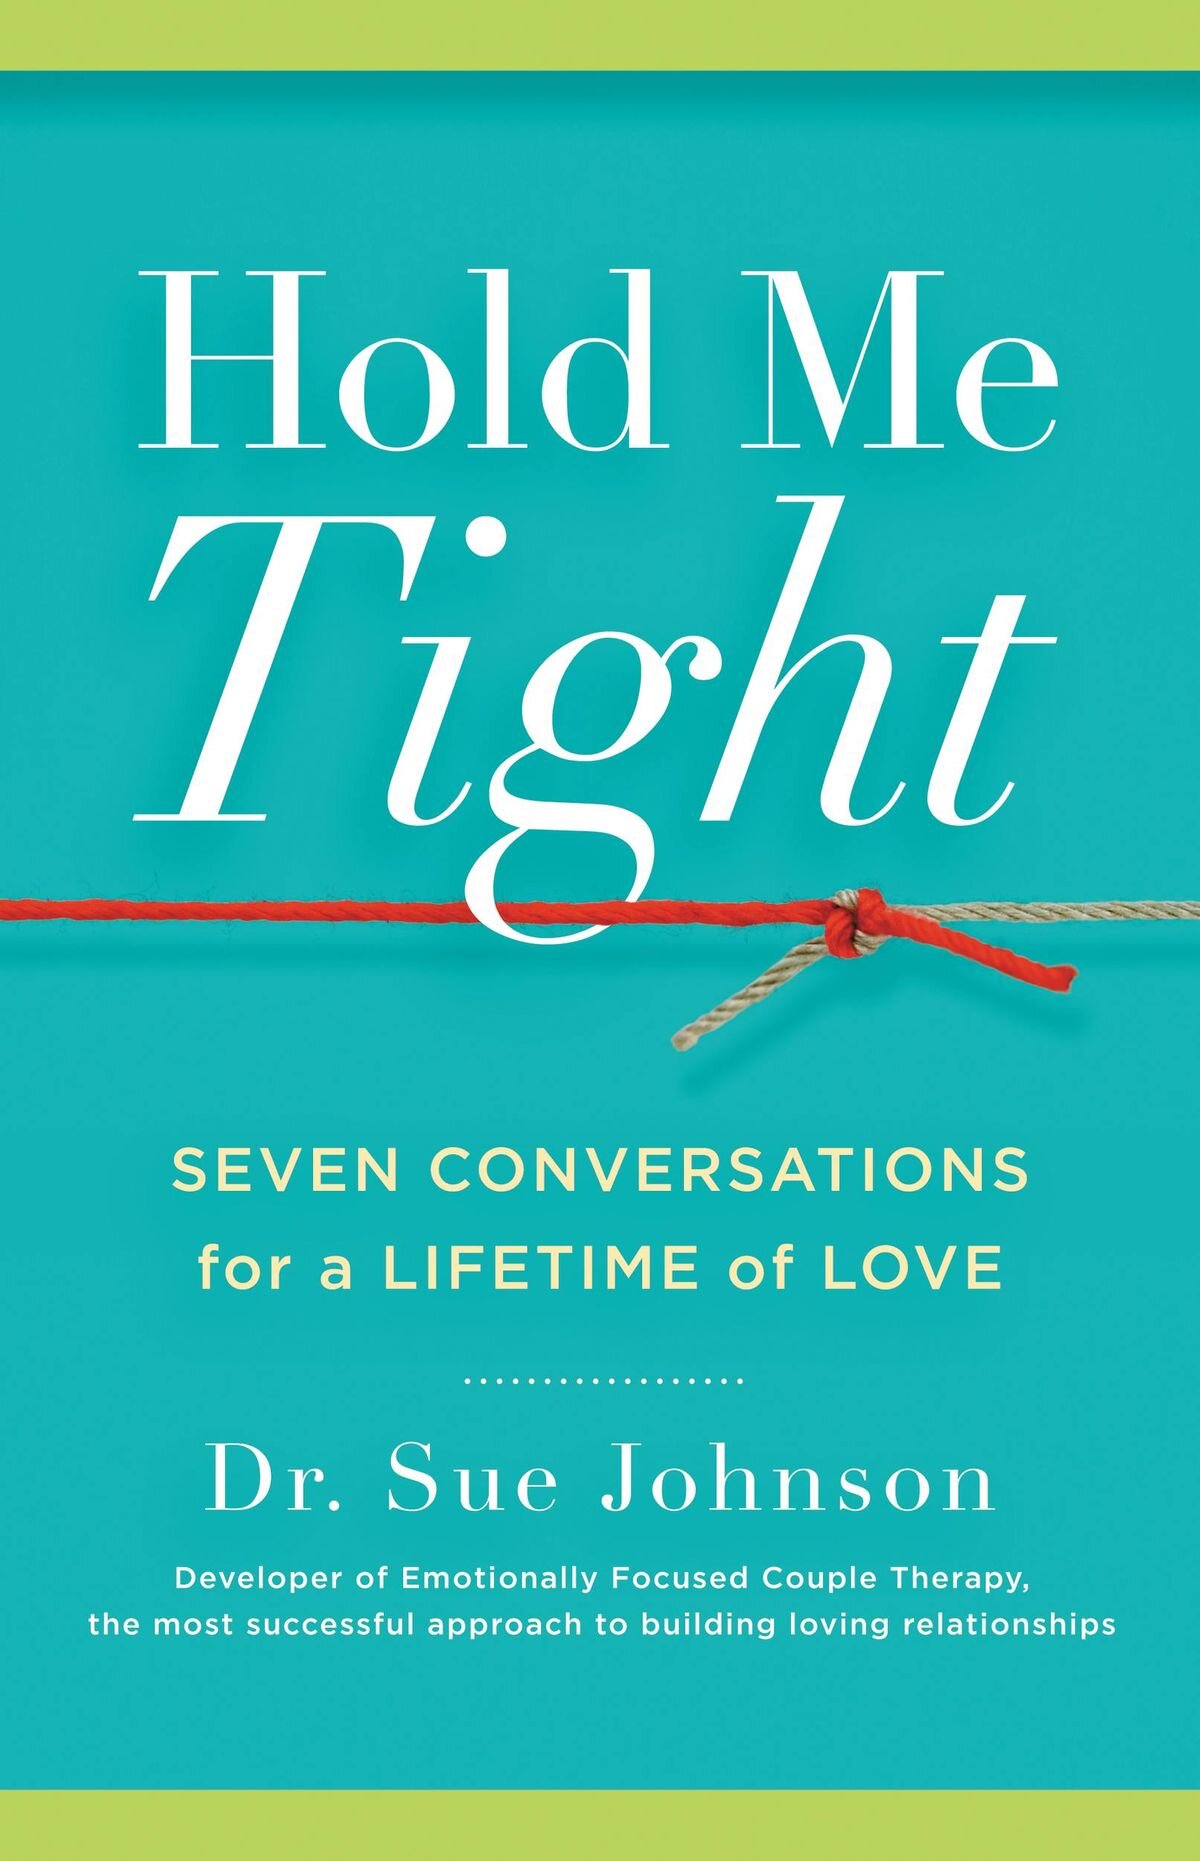 Hold Me Tight by Dr. Sue Johnson.jpg